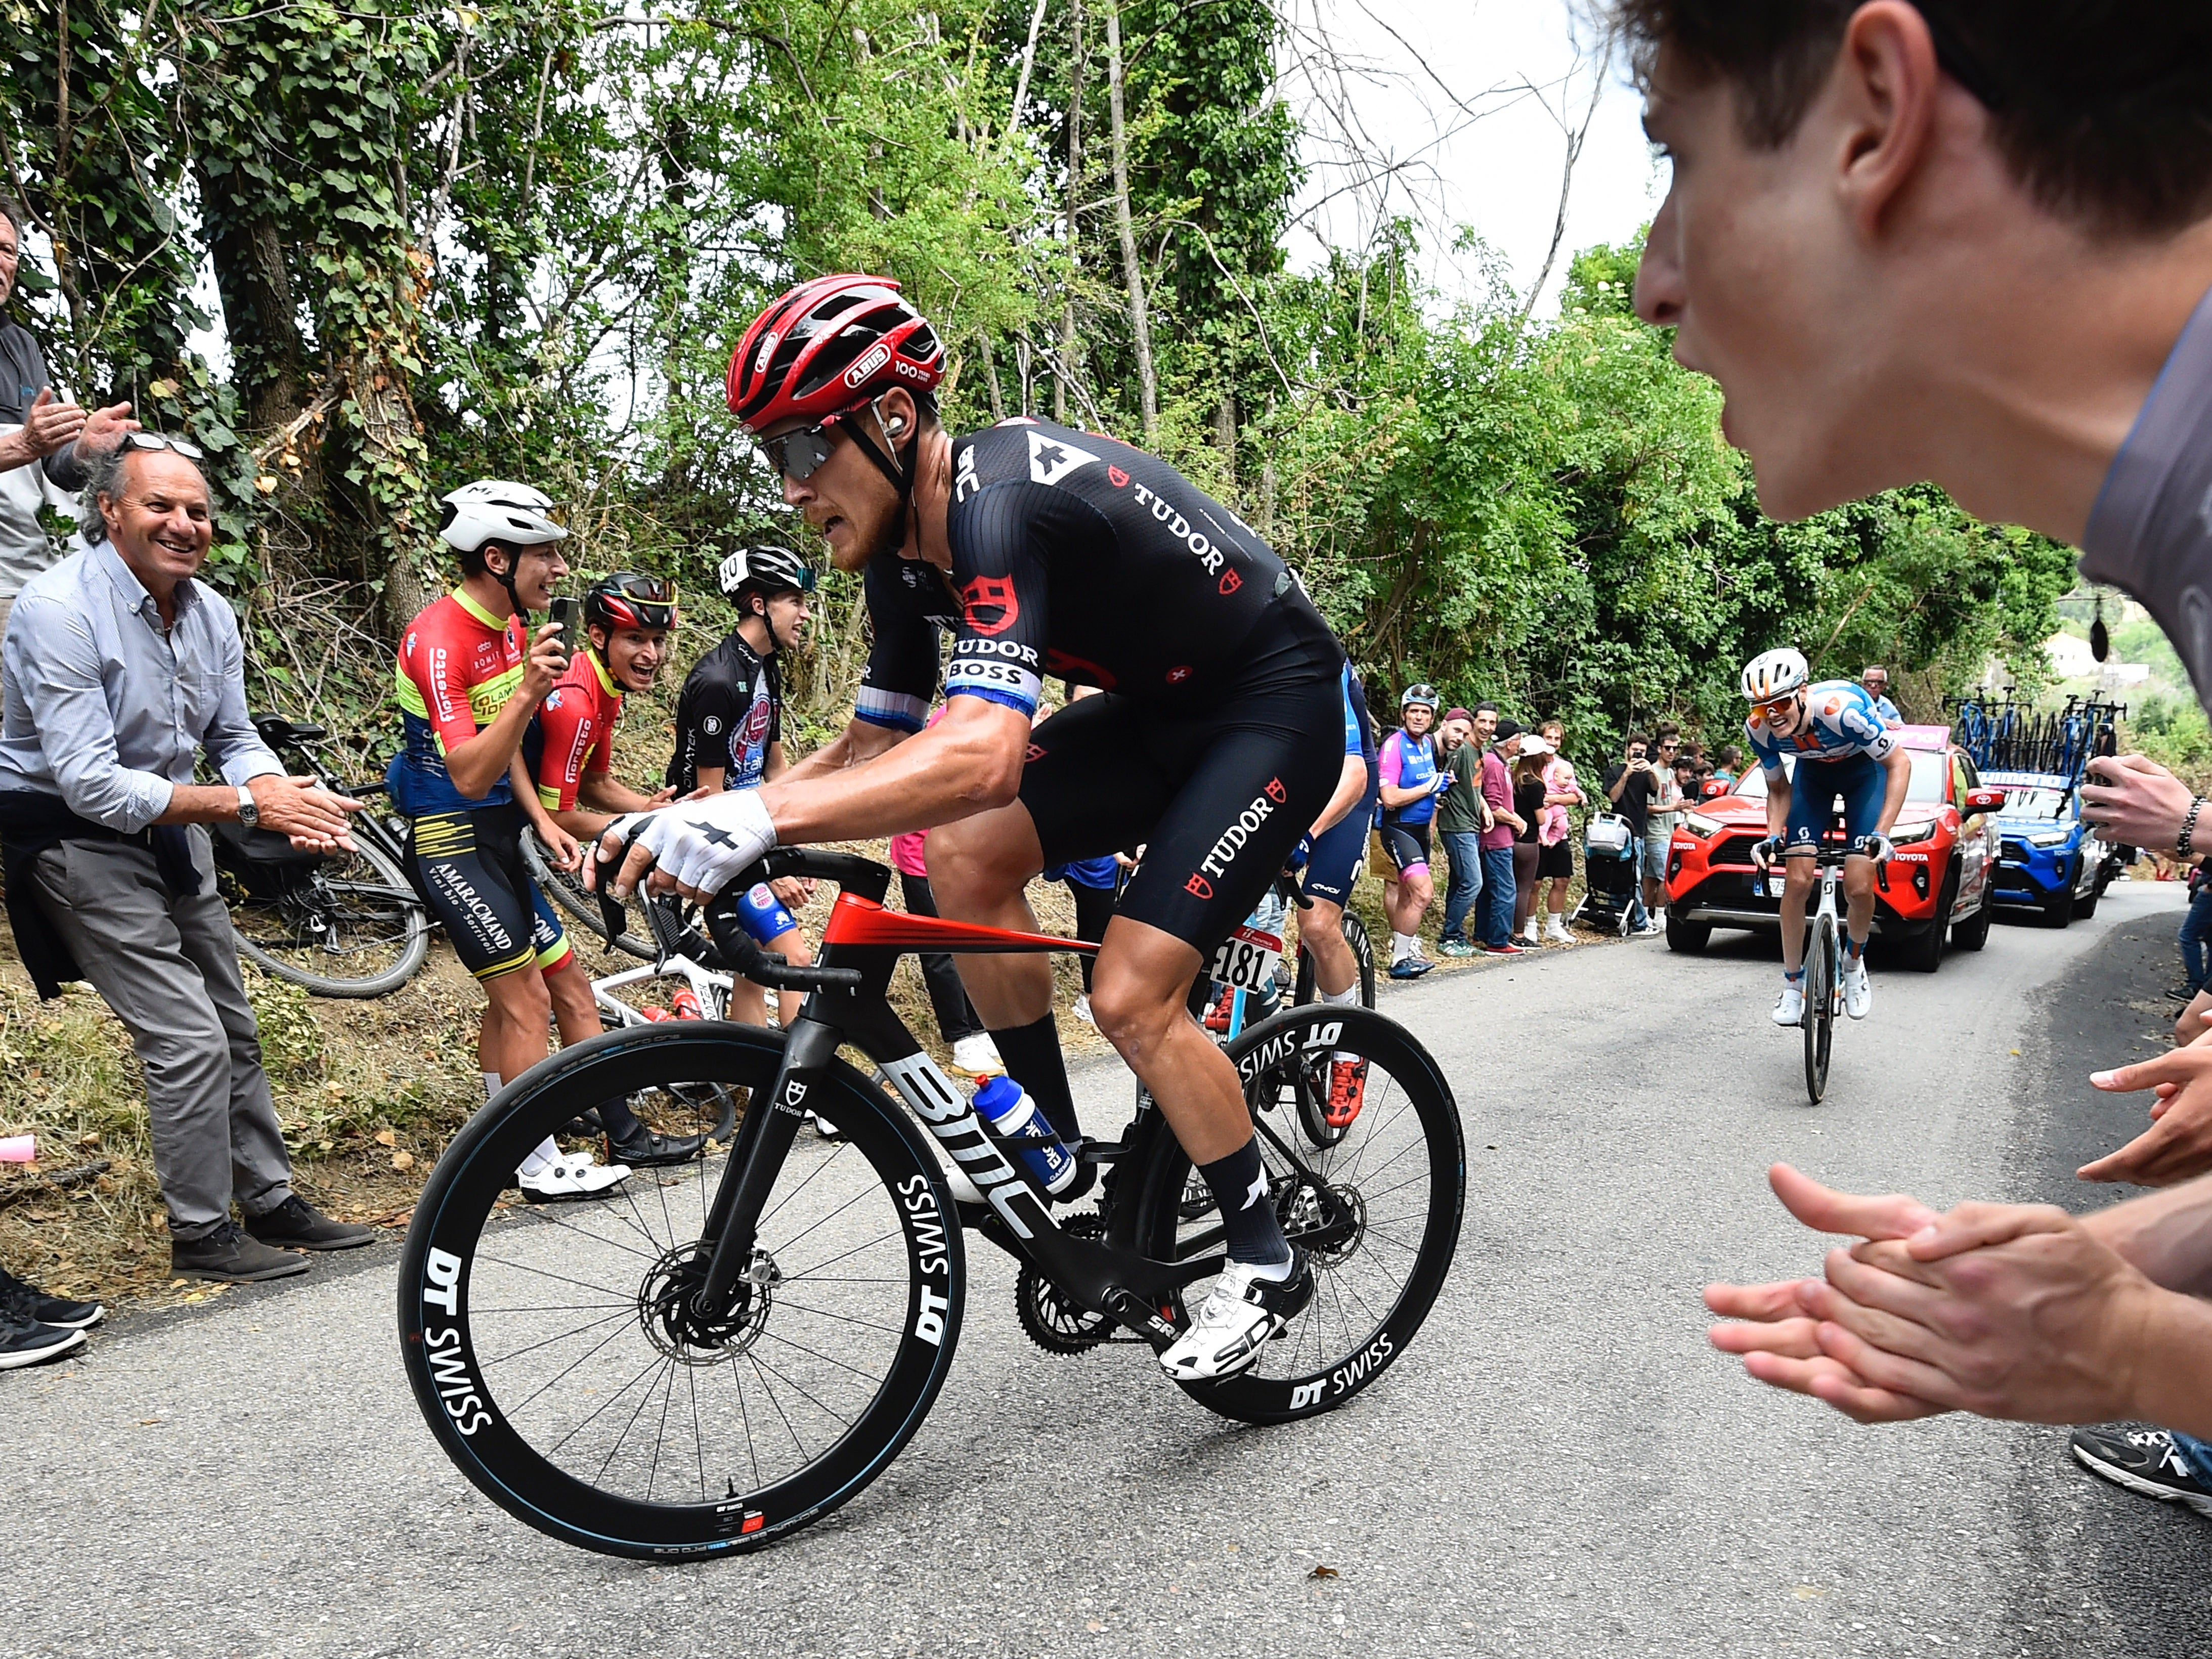 Trentin sixth in stage 12 Giro after day in breakaway BMC